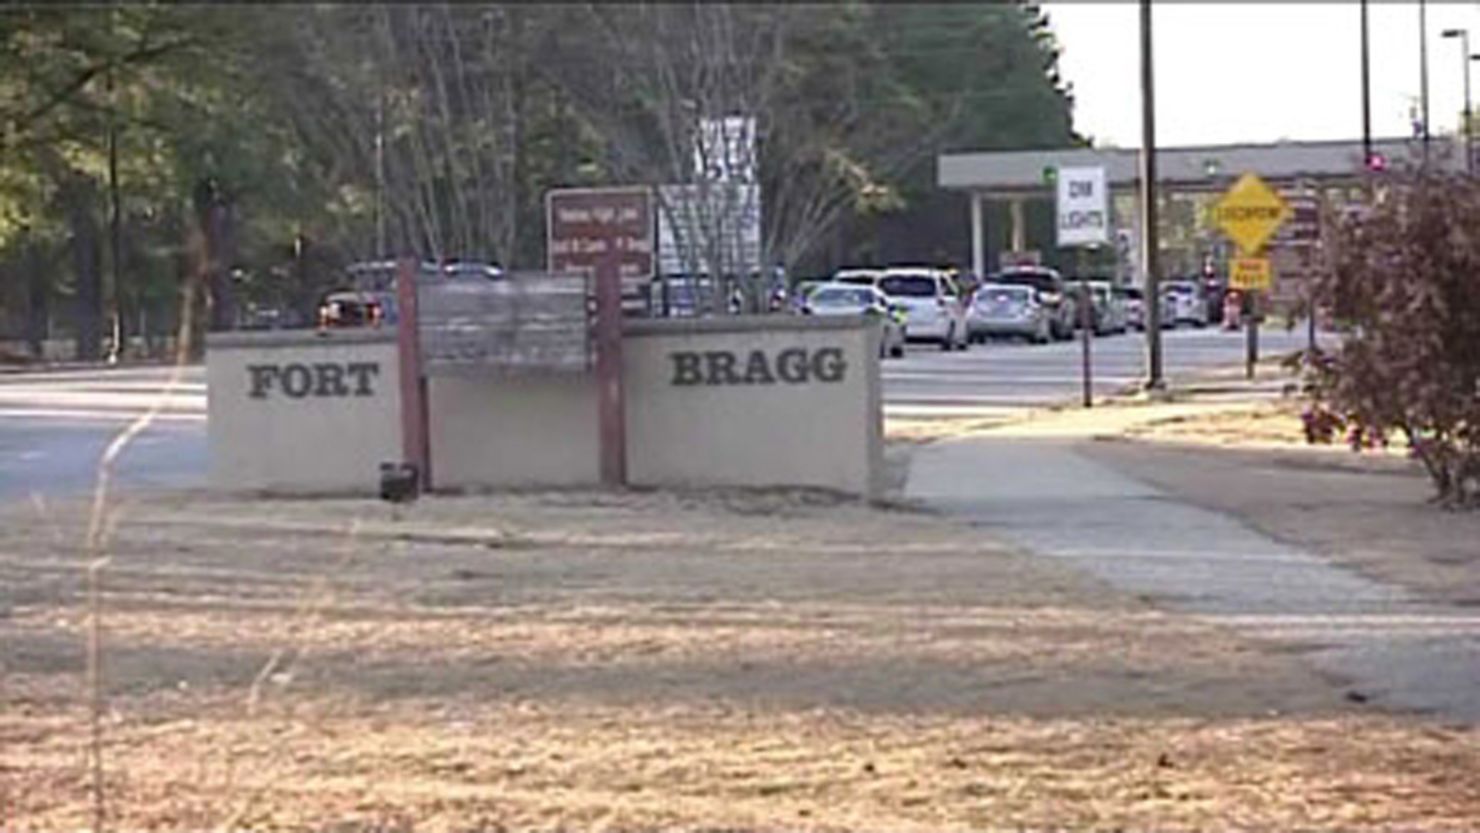 Officials say a man shot an officer to death before shooting himself at Fort Bragg on Thursday. A specialist also was wounded.